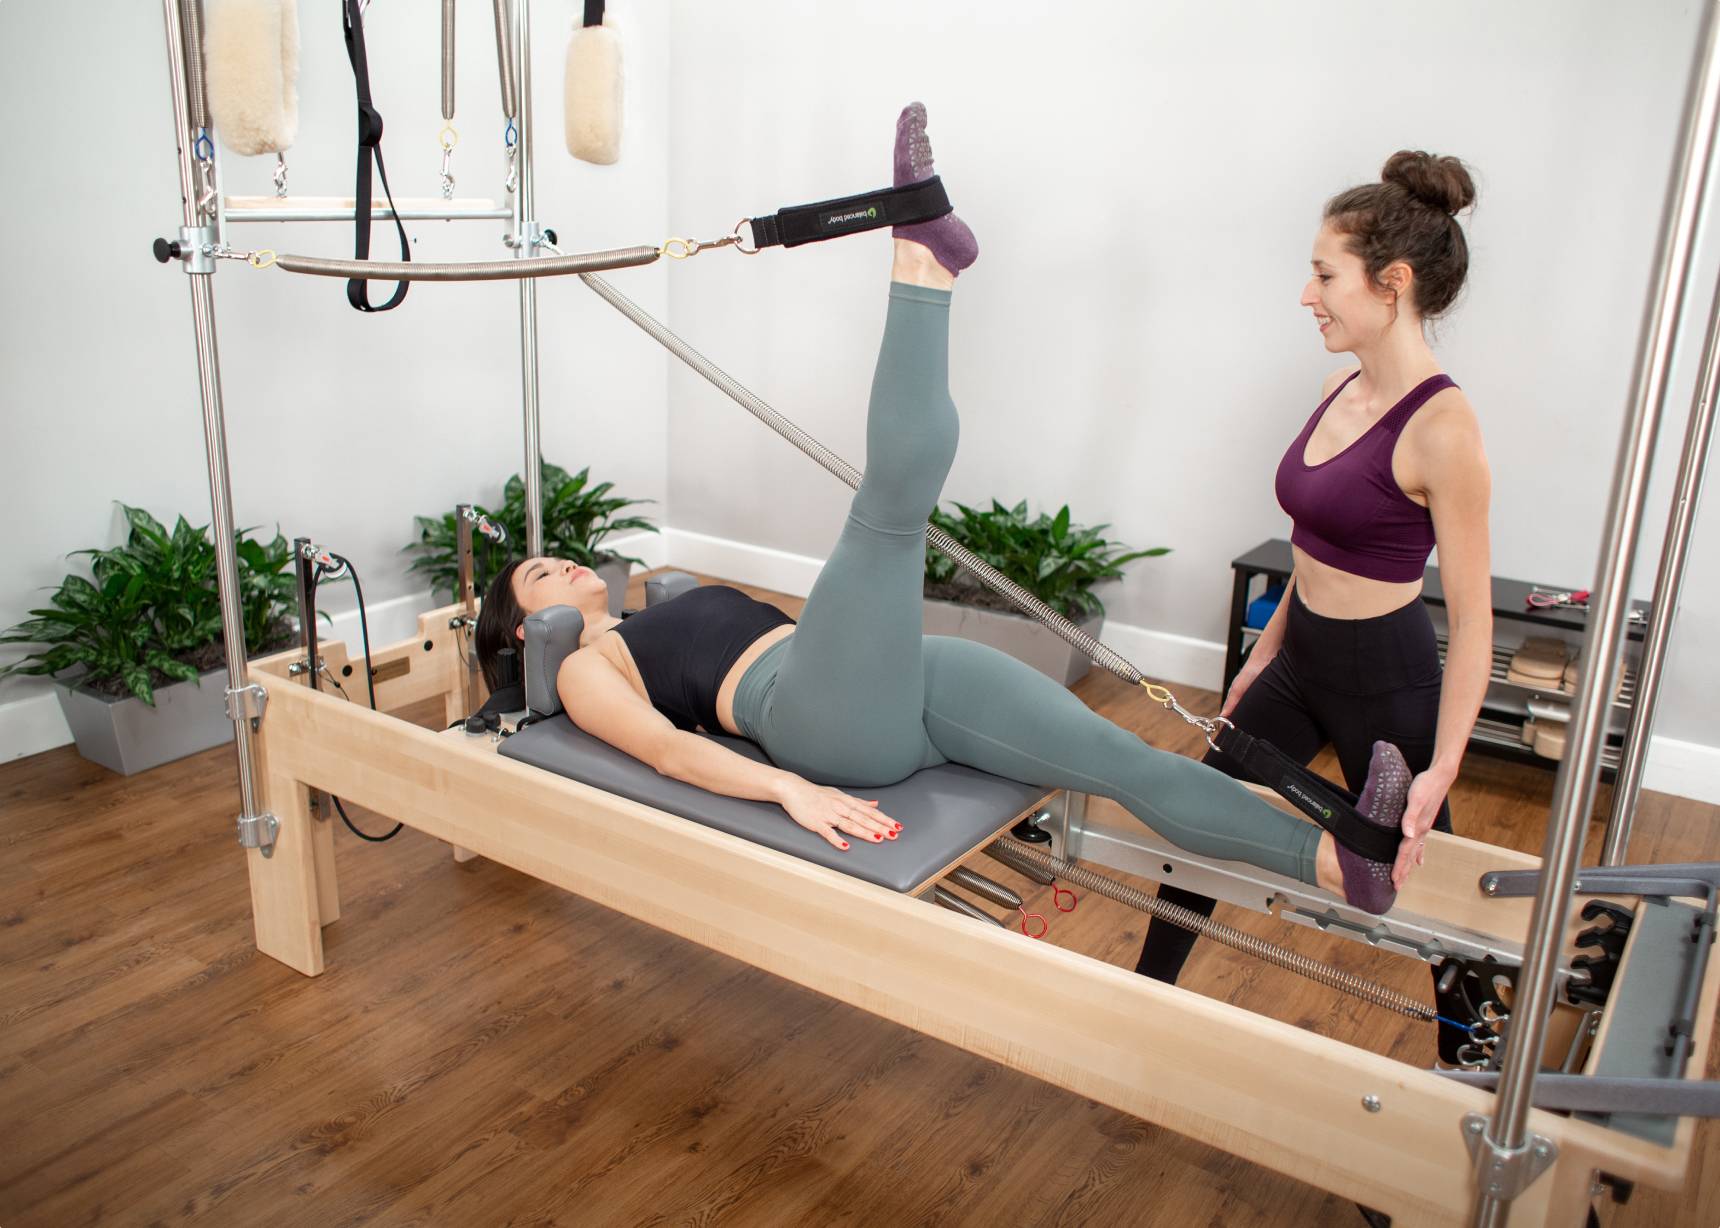 Buy Private Pilates Combo Cadillac Reformer with Free Shipping – Pilates  Reformers Plus